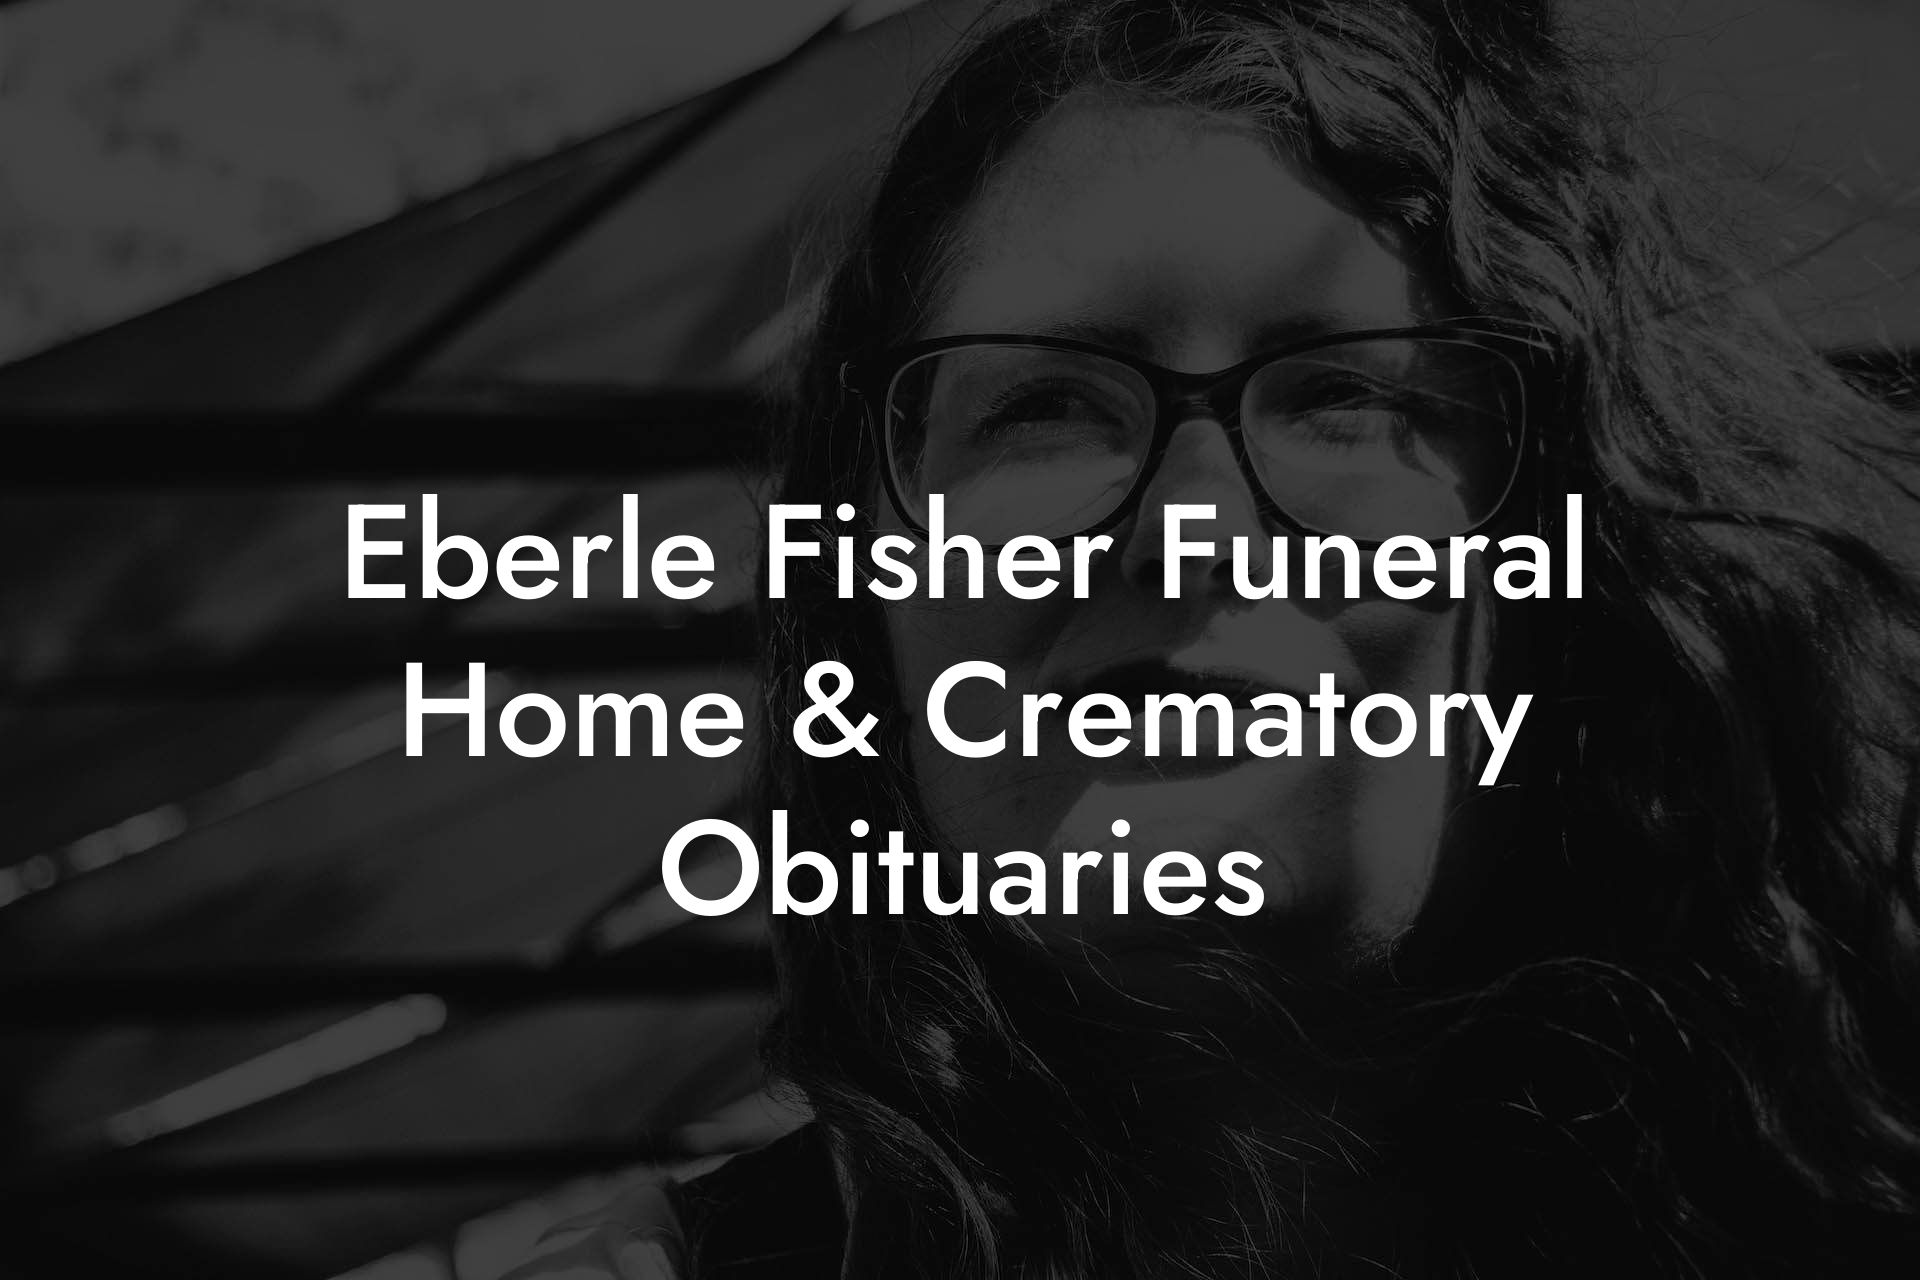 Eberle Fisher Funeral Home & Crematory Obituaries